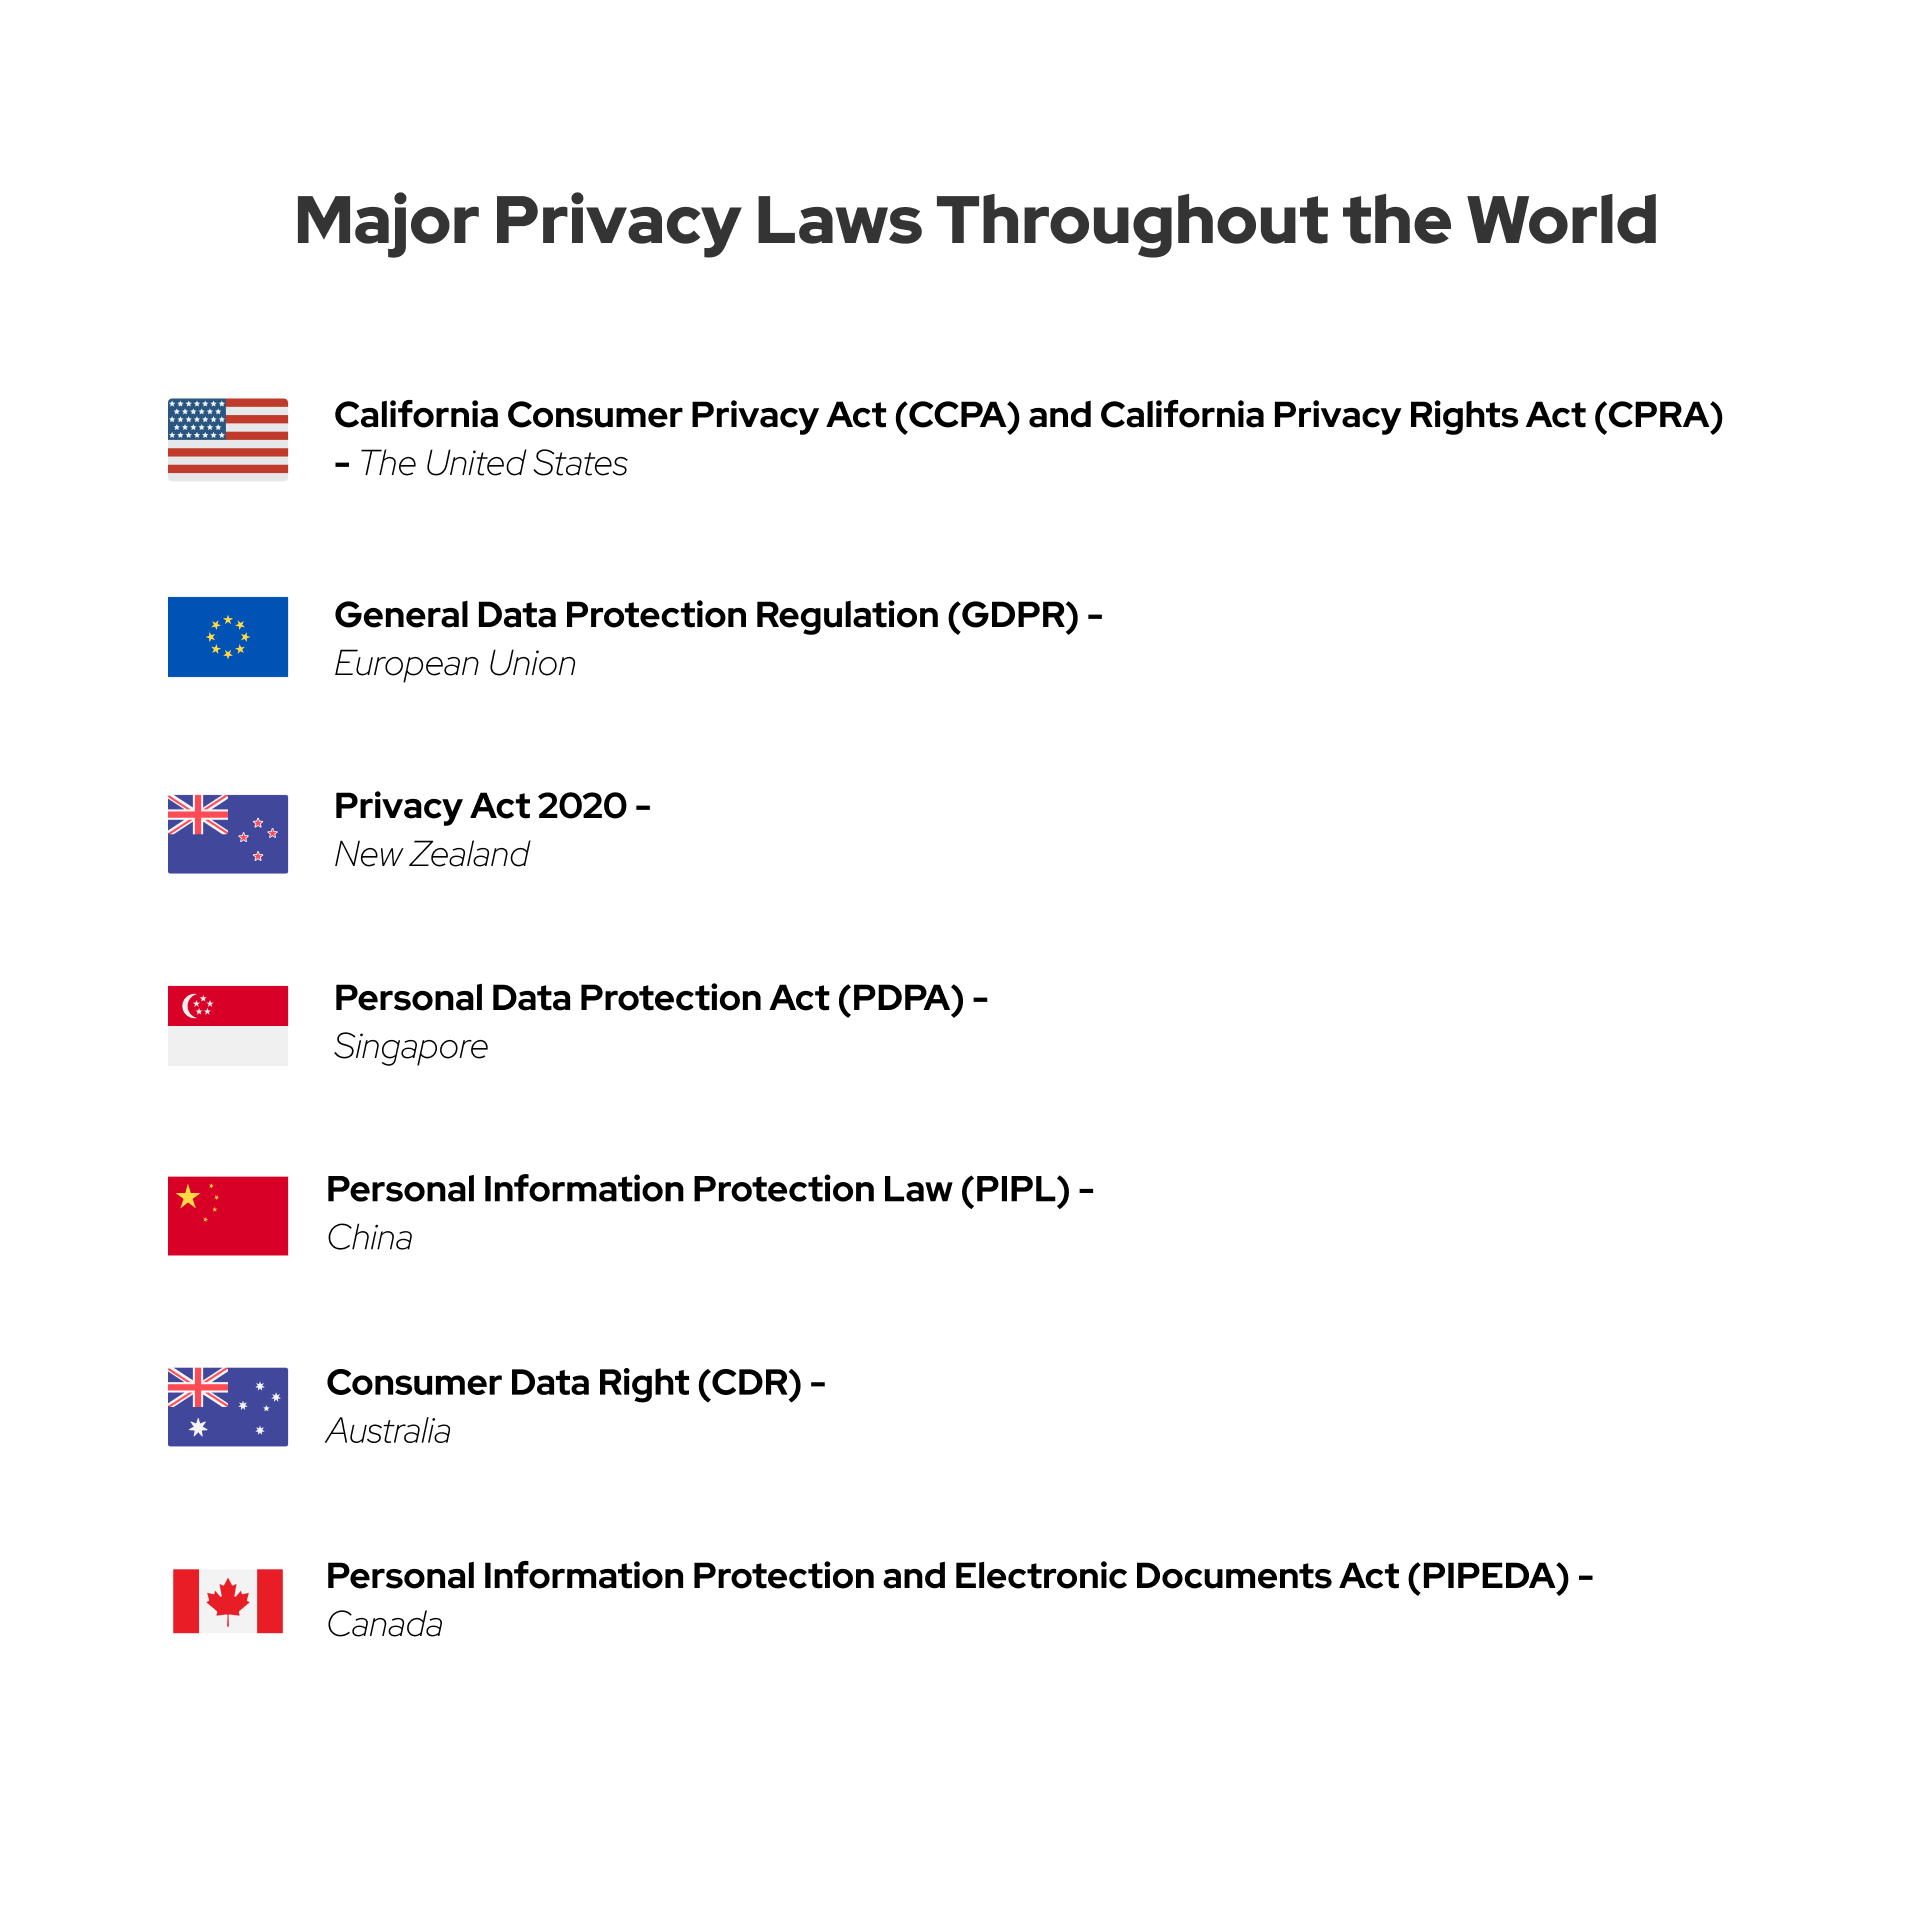 While working on document management software development, you should study privacy regulations for your specific region.